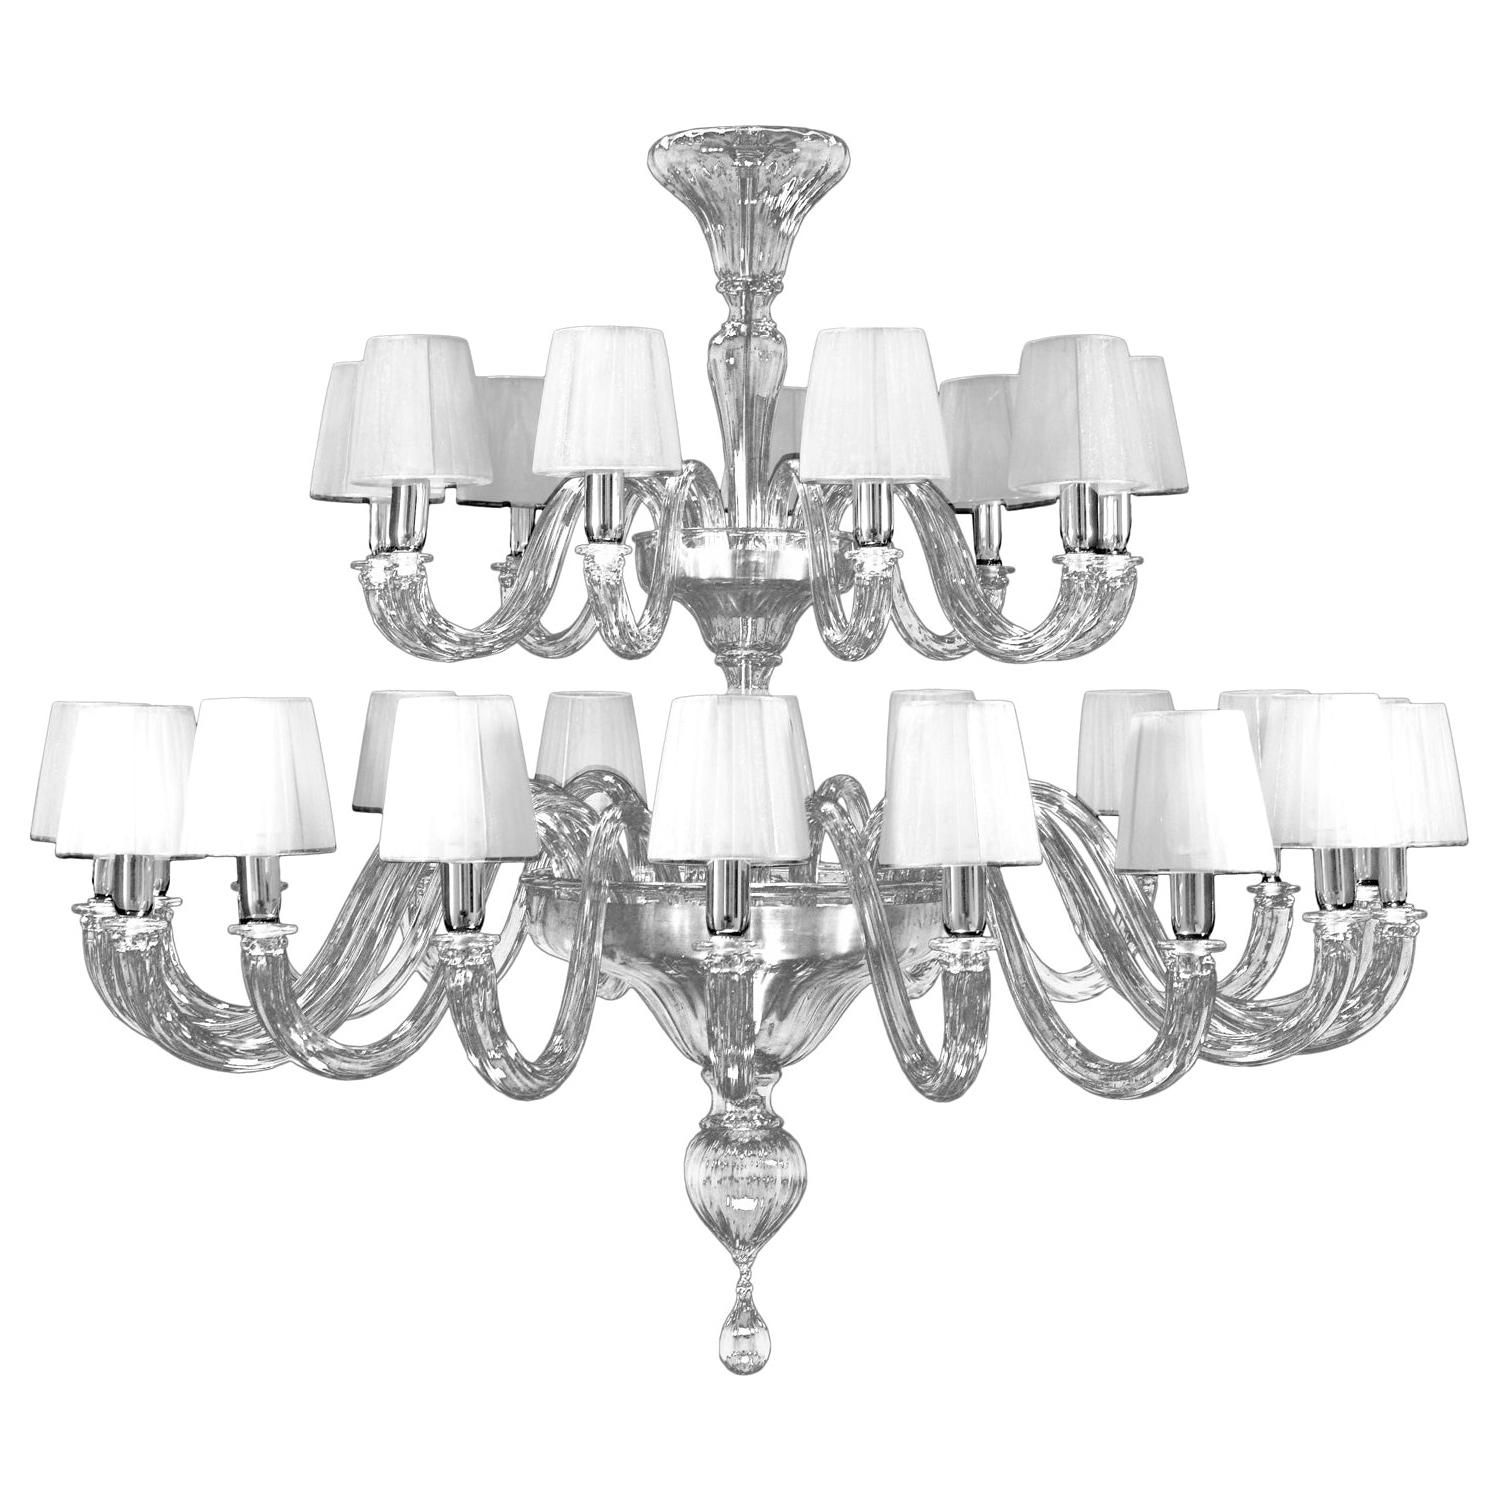 Chandelier 18+9 arms Crystal Murano Glass handmade lampshades by Multiforme